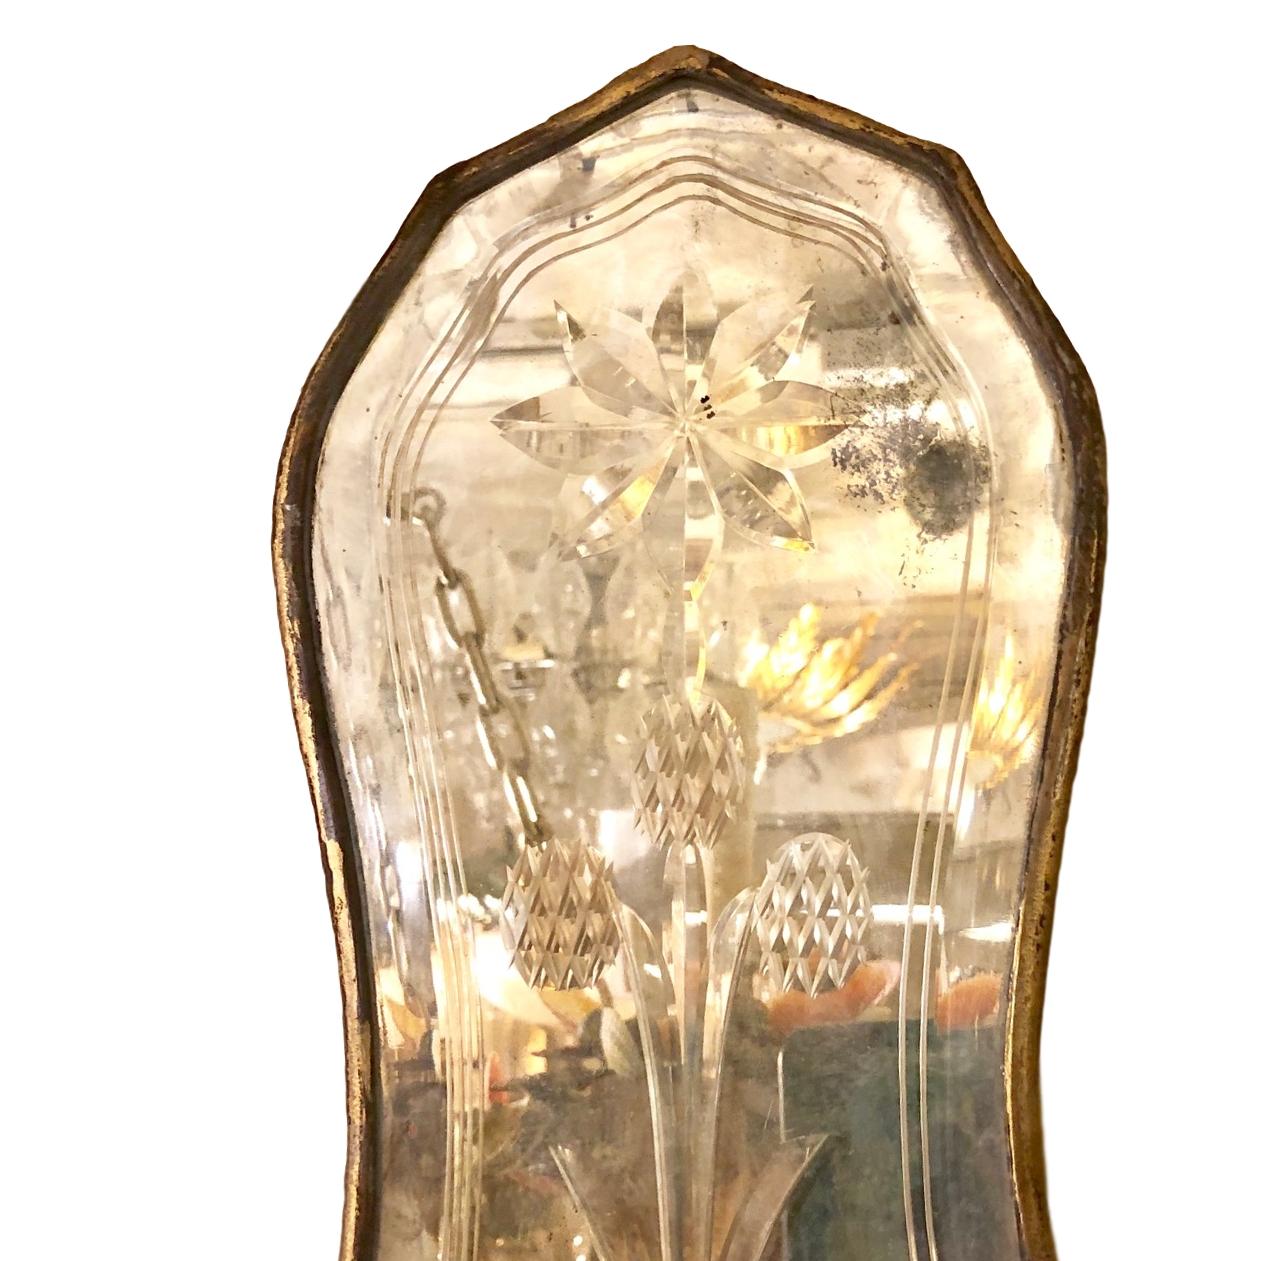 Pair of 1920s English etched glass double light sconces with gilt and patinated finish.

Measurements:
Height 18?
Width 8.5?
Depth 5?.